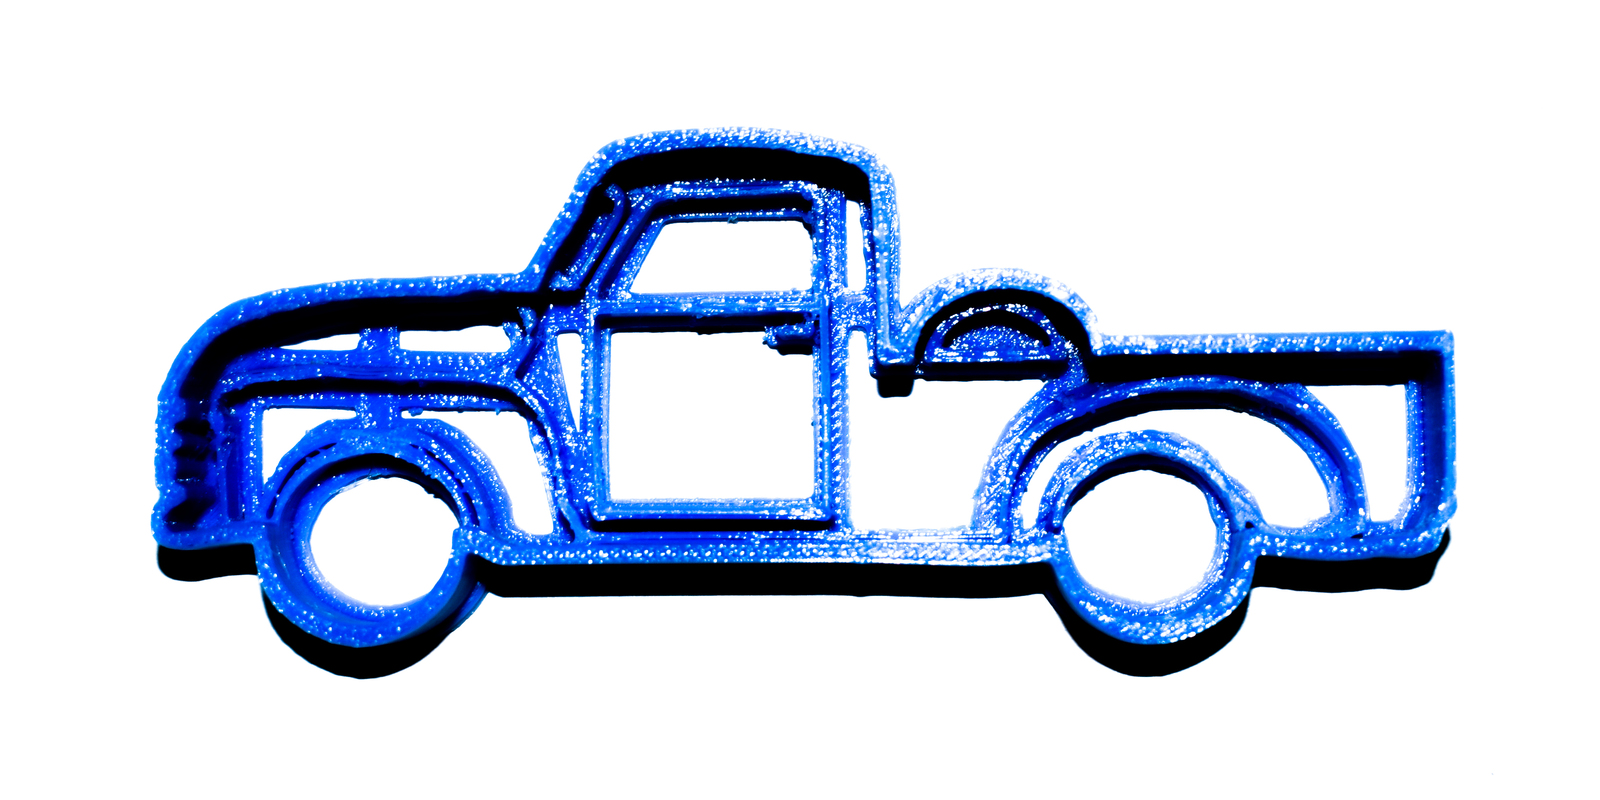 Classic Old Pick Up Truck Pickup Vintage Cookie Cutter 3D Printed USA PR281